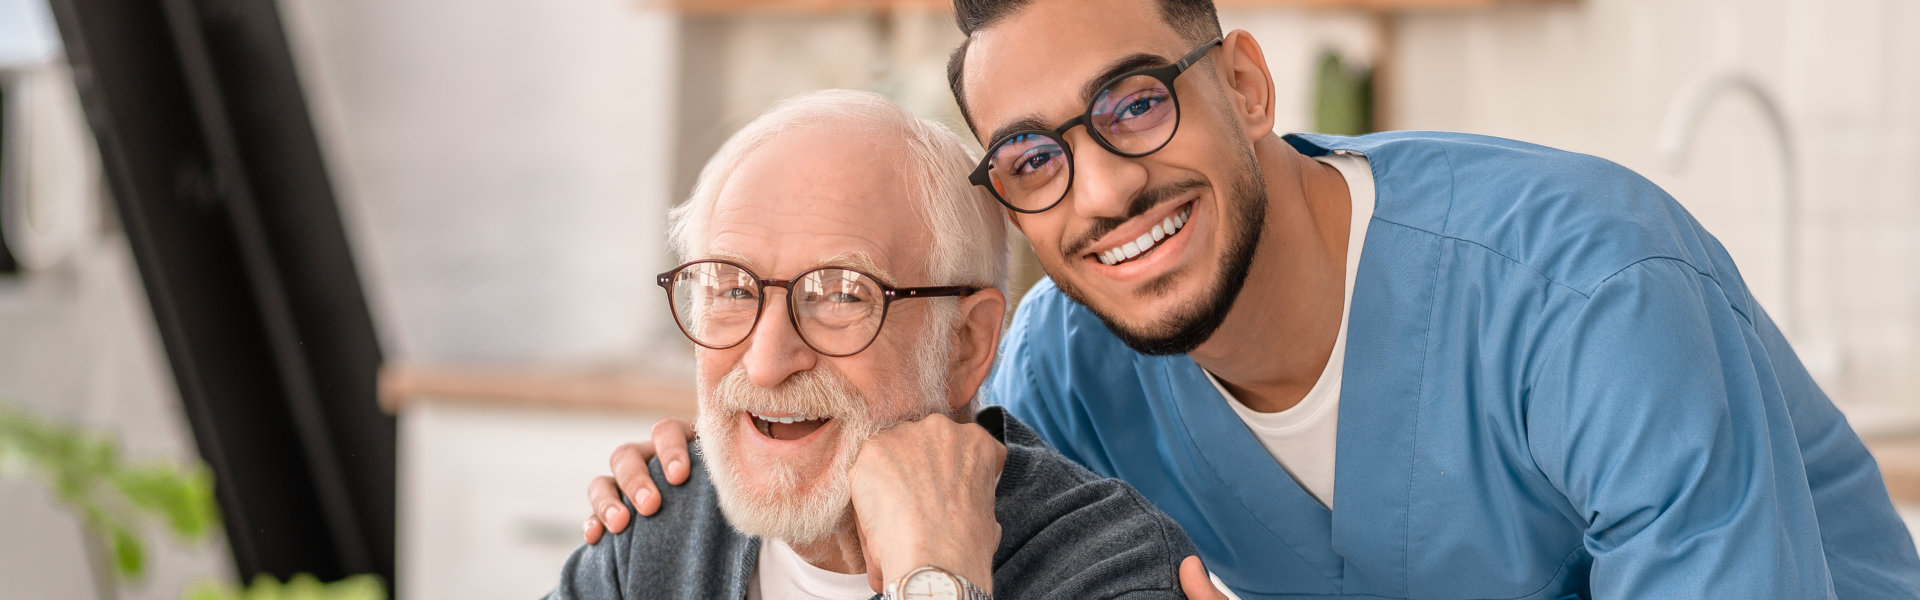 nurse and elderly man smiling and looking at the camera